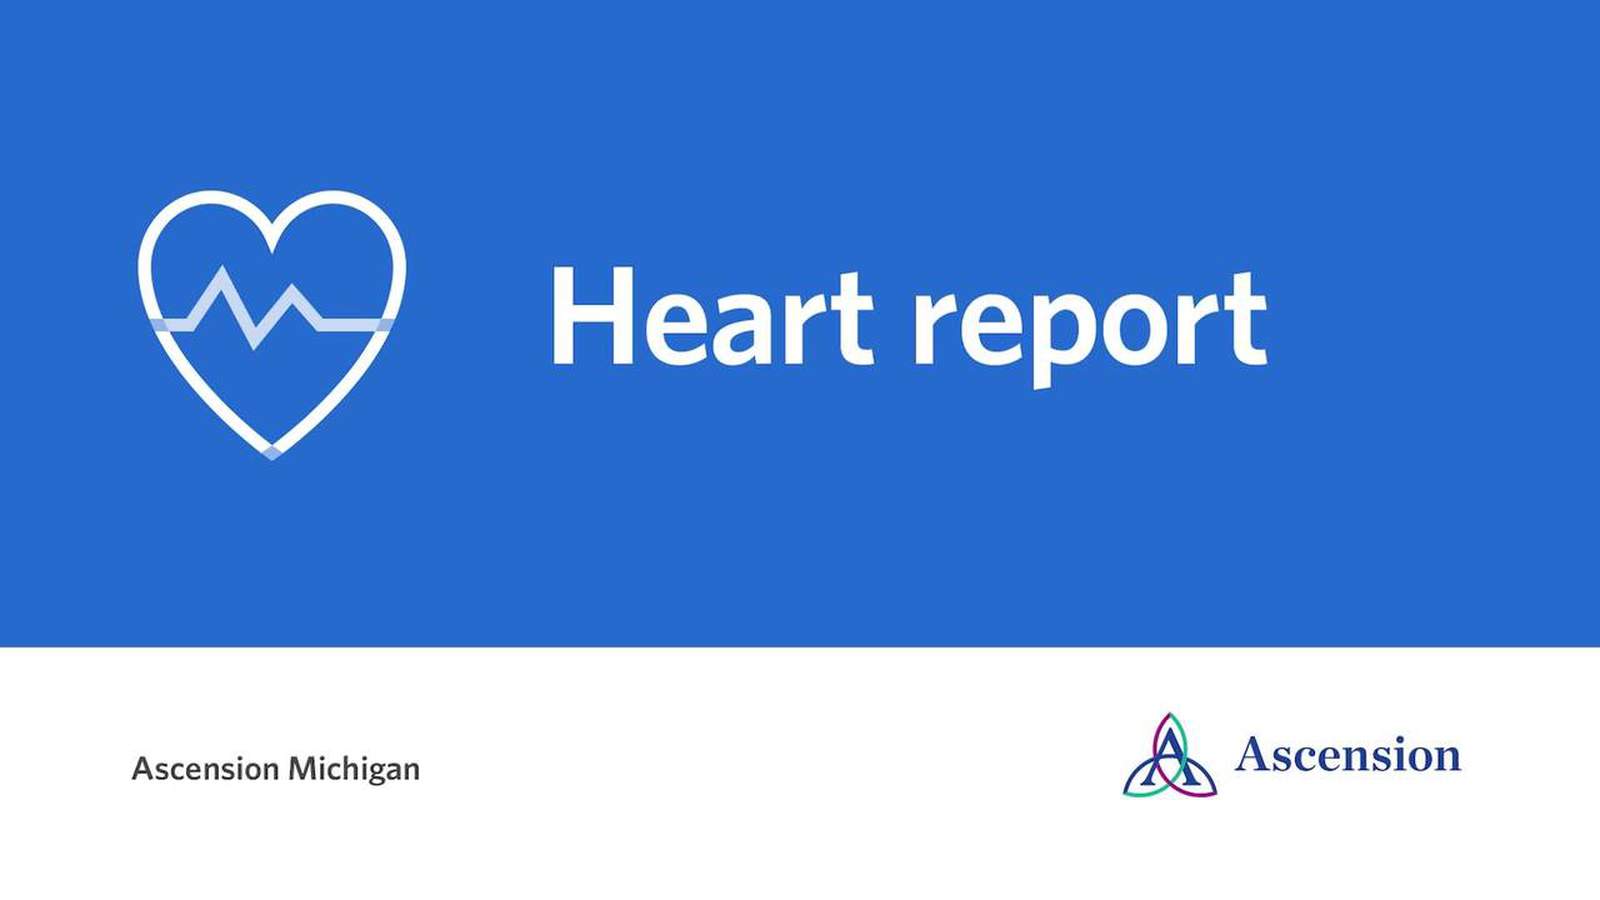 Ascension Michigan Heart Report: What is an echocardiogram?